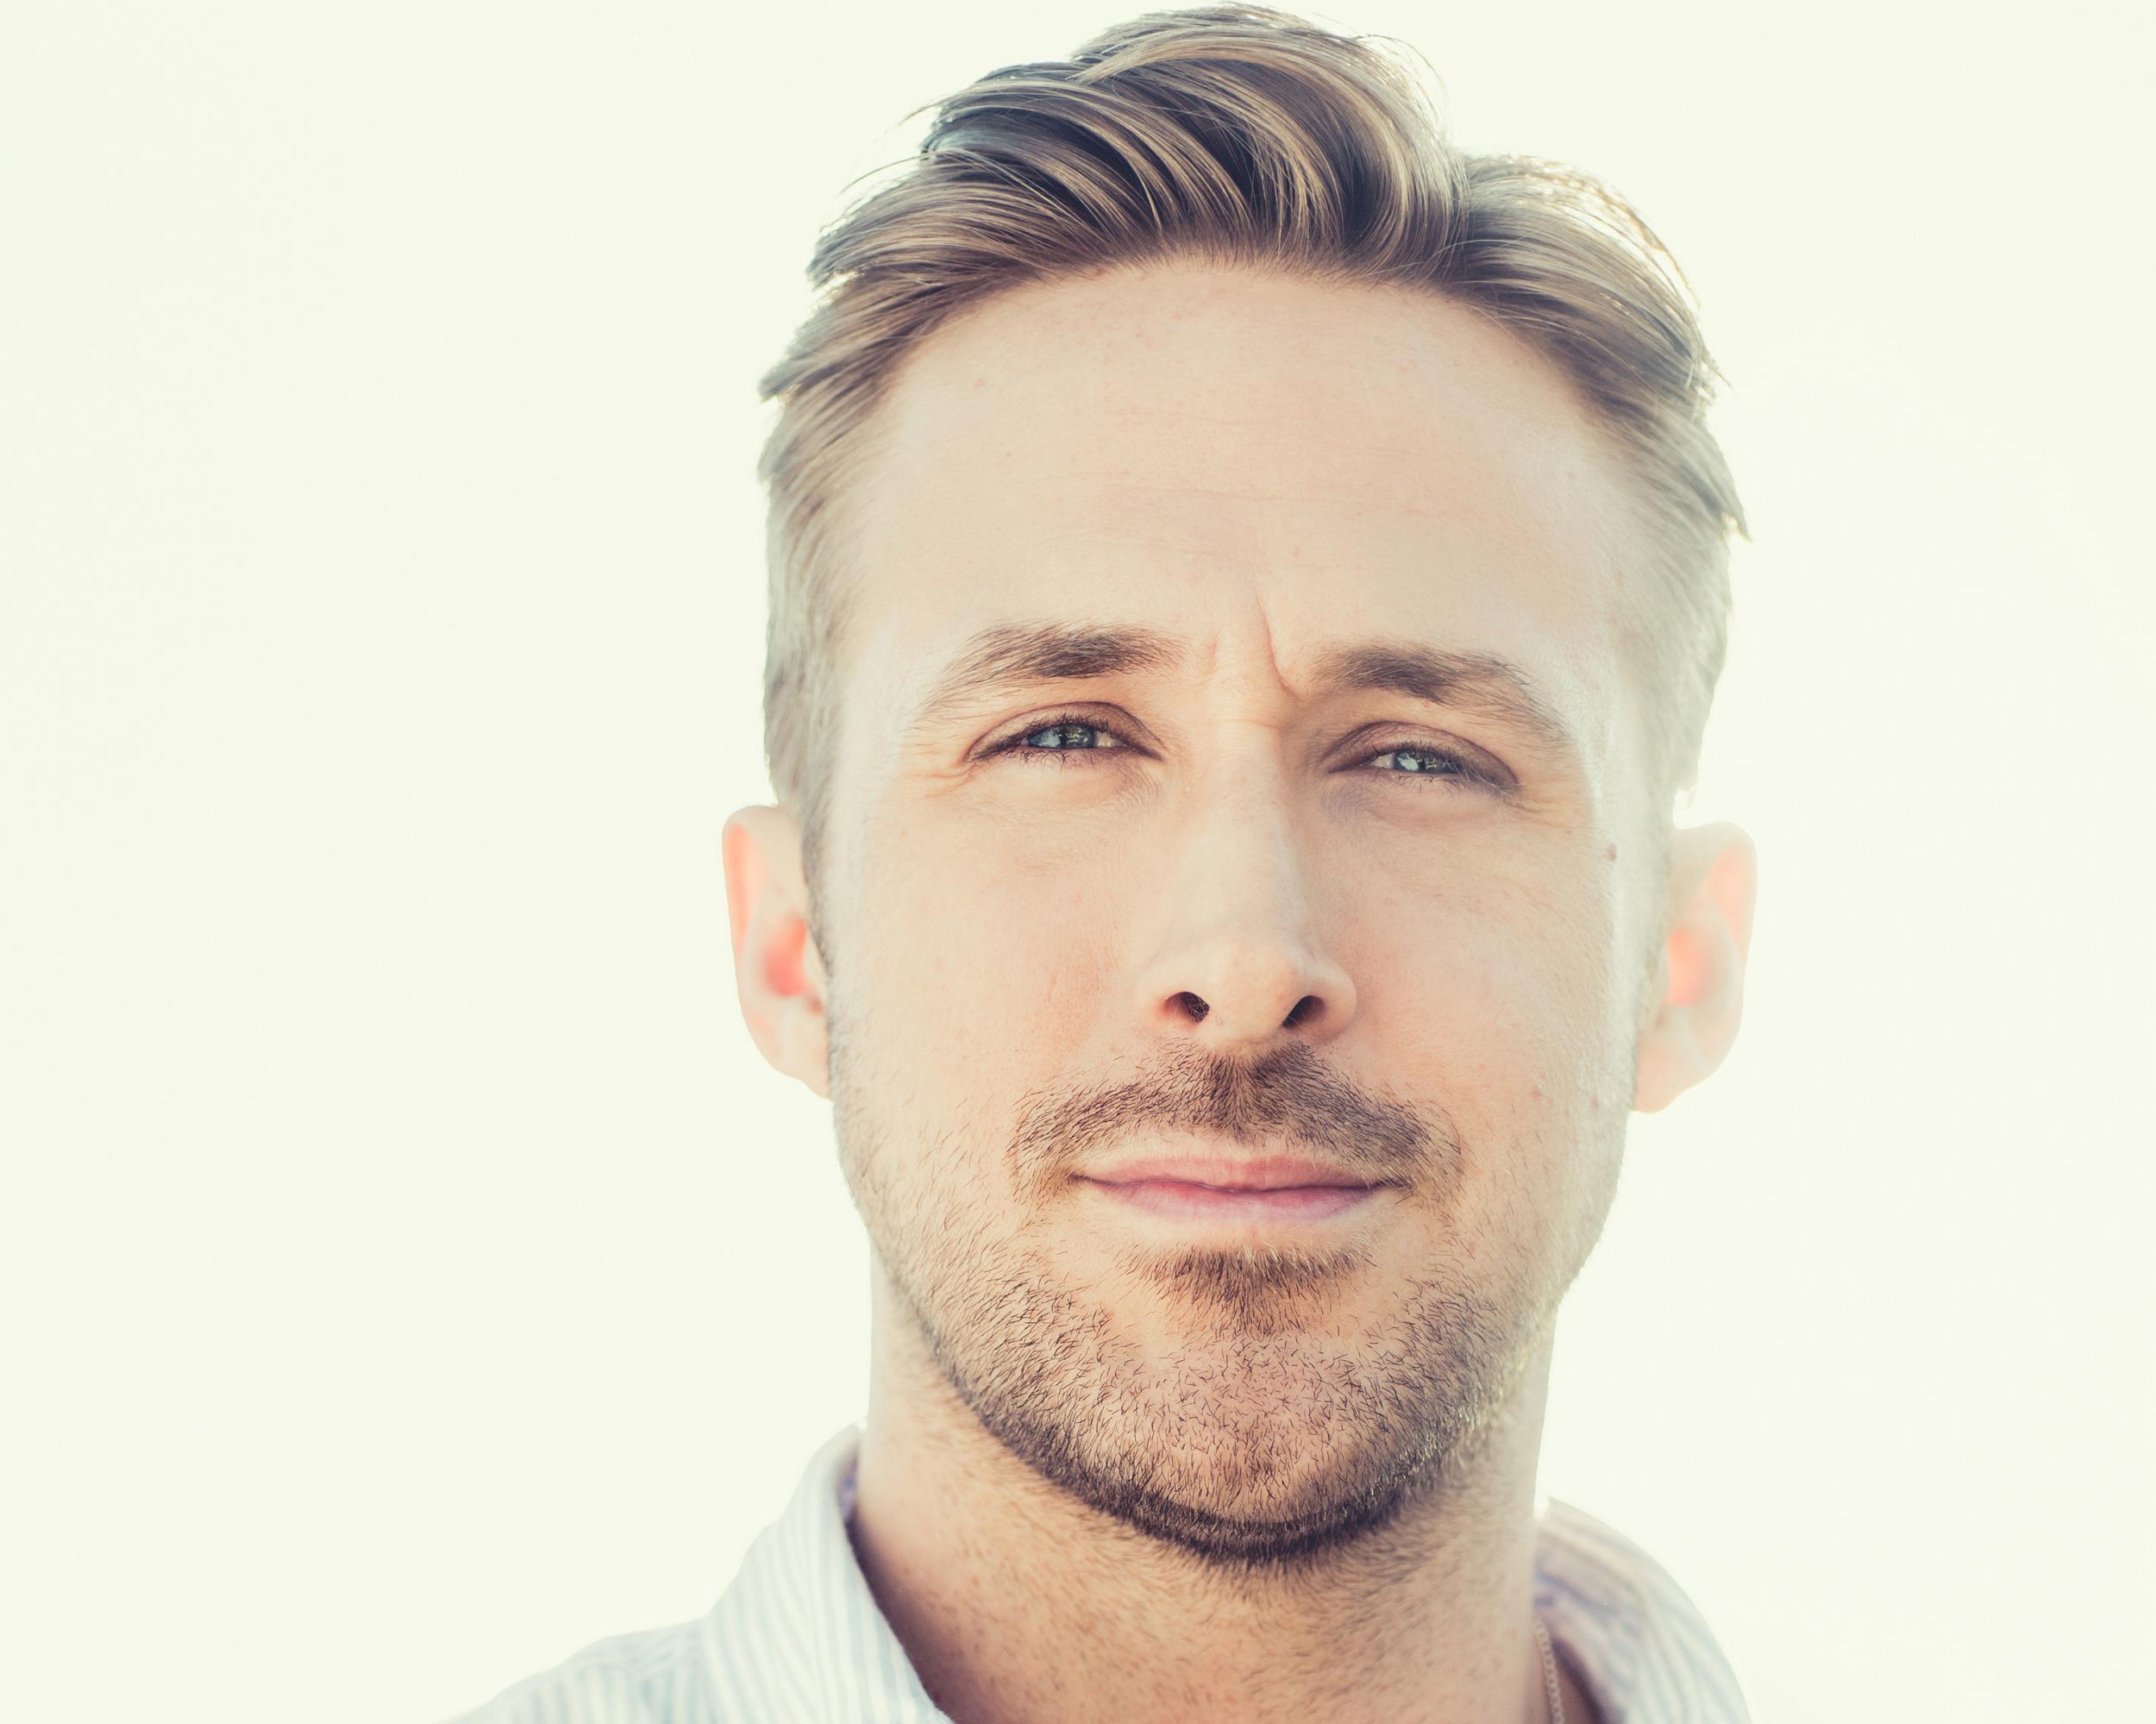 Ryan Gosling Wallpaper Image Photos Pictures Background